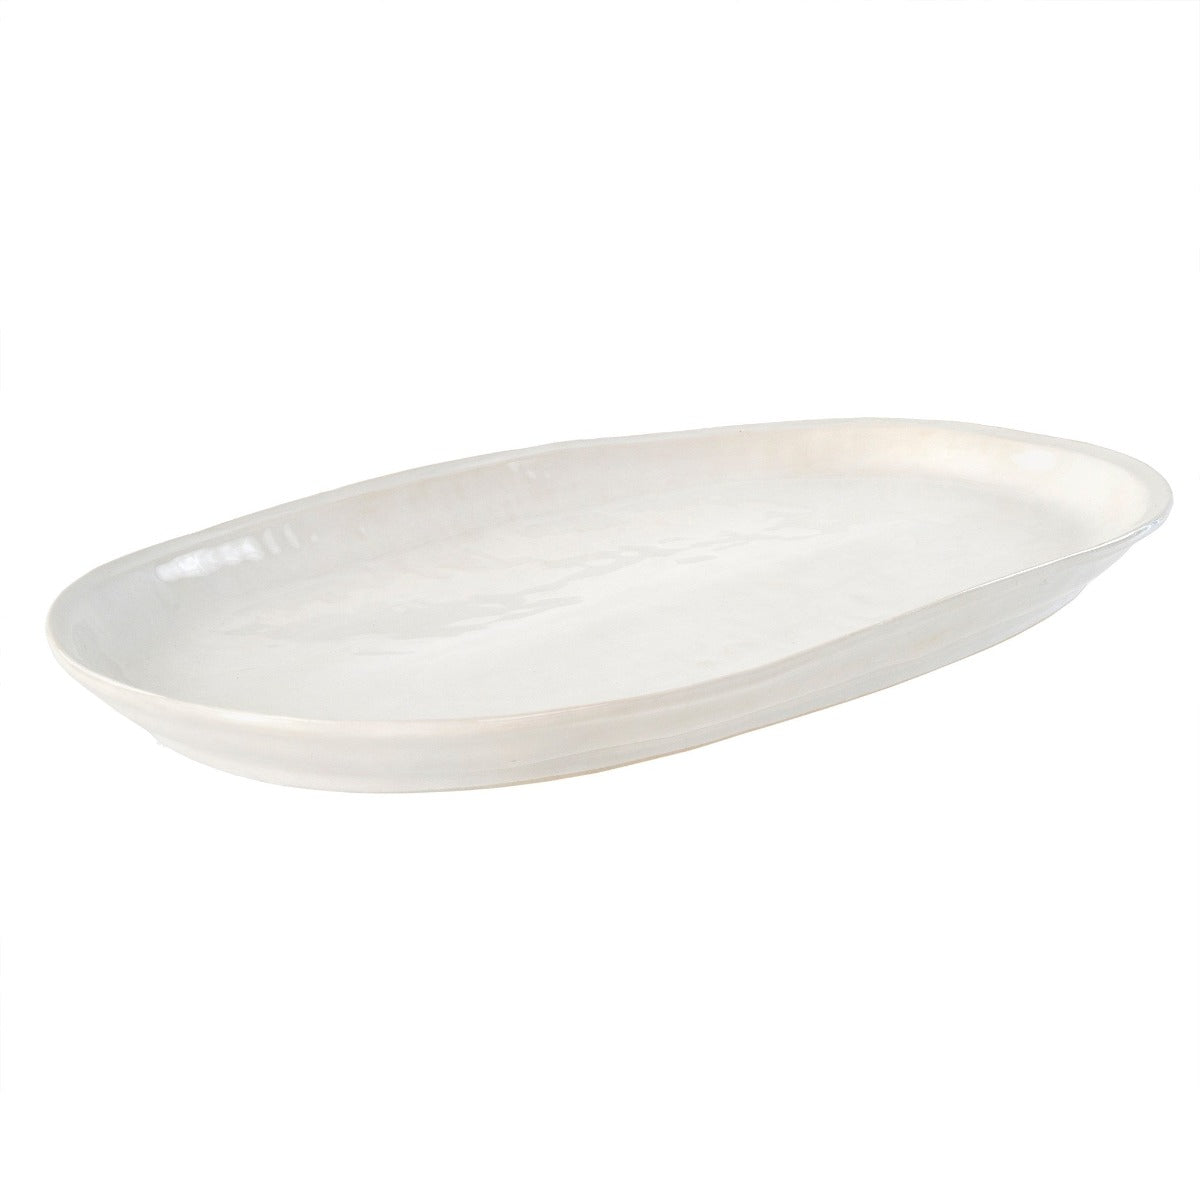 Highland Stoneware Oval Platter: STYLE: Quiet Luxury, Elegant, Farmhouse, Chic. MATERIAL: handmade from stoneware. TYPE: Serveware. USES: Kitchen & Dining Room. SKU 4-8283